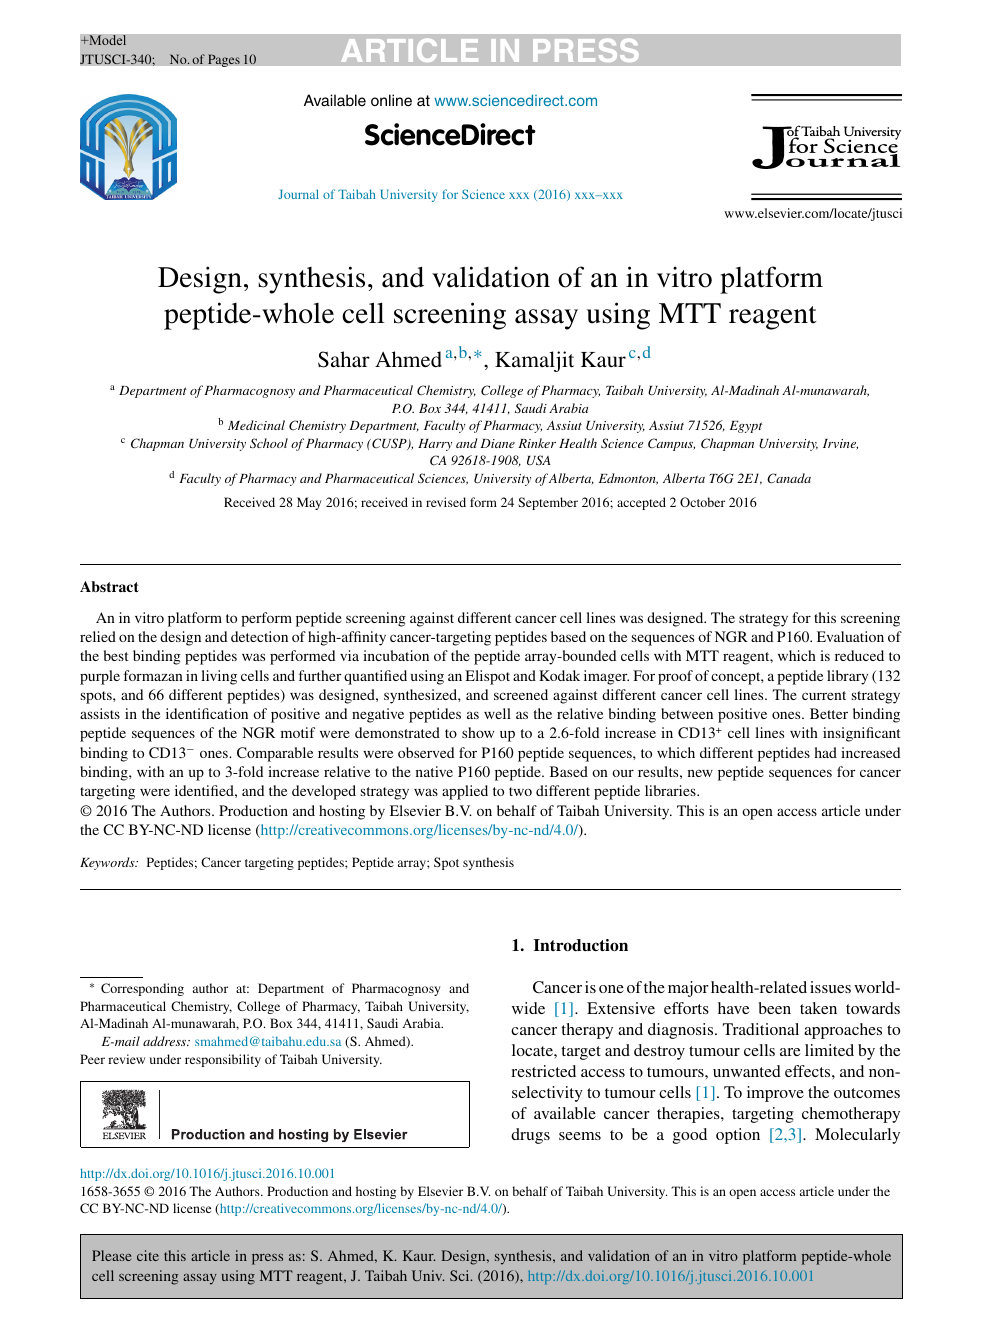 Design Synthesis And Validation Of An In Vitro Platform Peptide Whole Cell Screening Assay Using Mtt Reagent Topic Of Research Paper In Chemical Sciences Download Scholarly Article Pdf And Read For Free